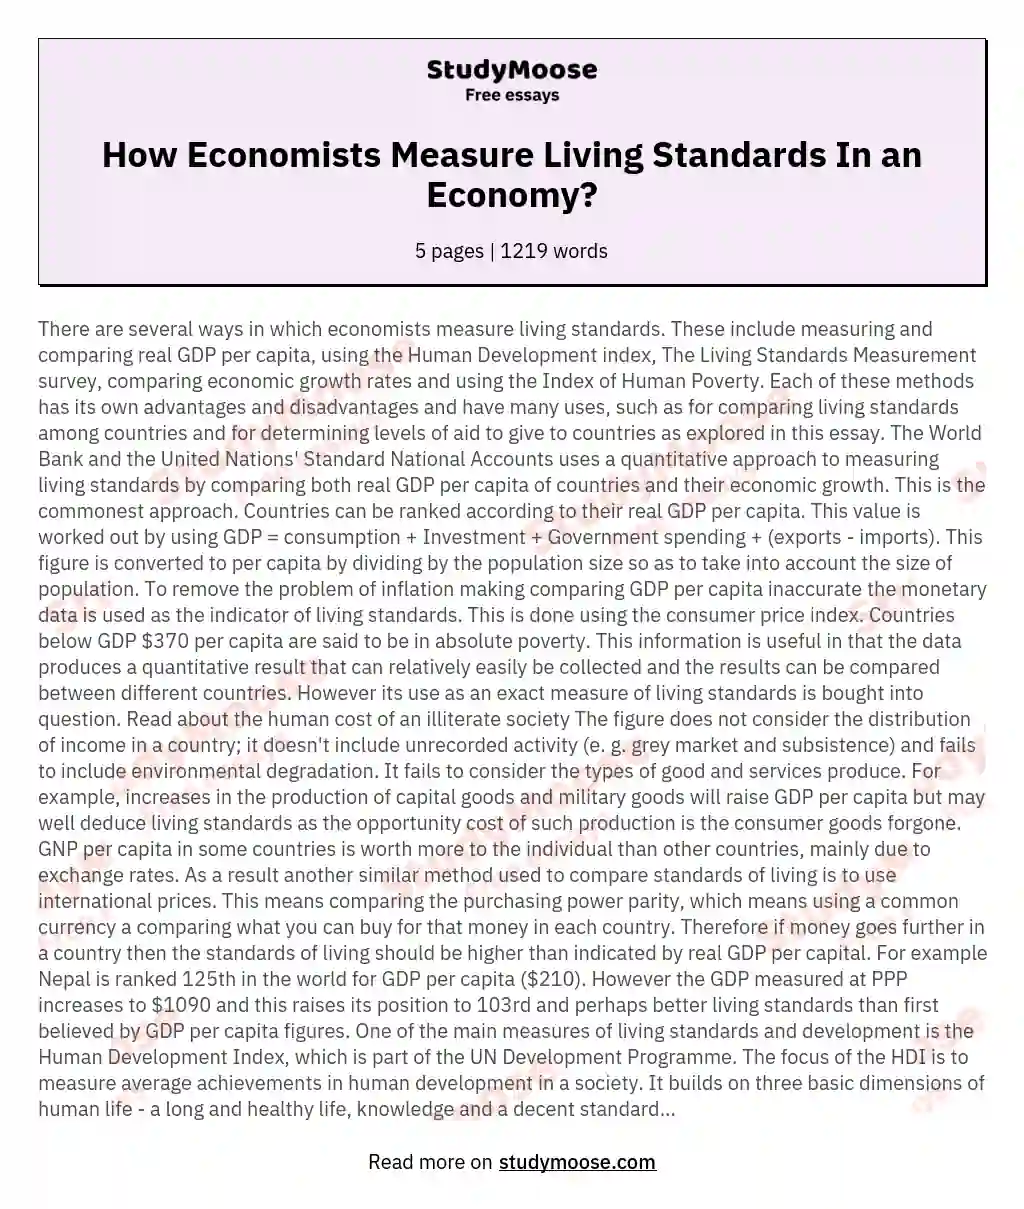 How Economists Measure Living Standards In an Economy? essay